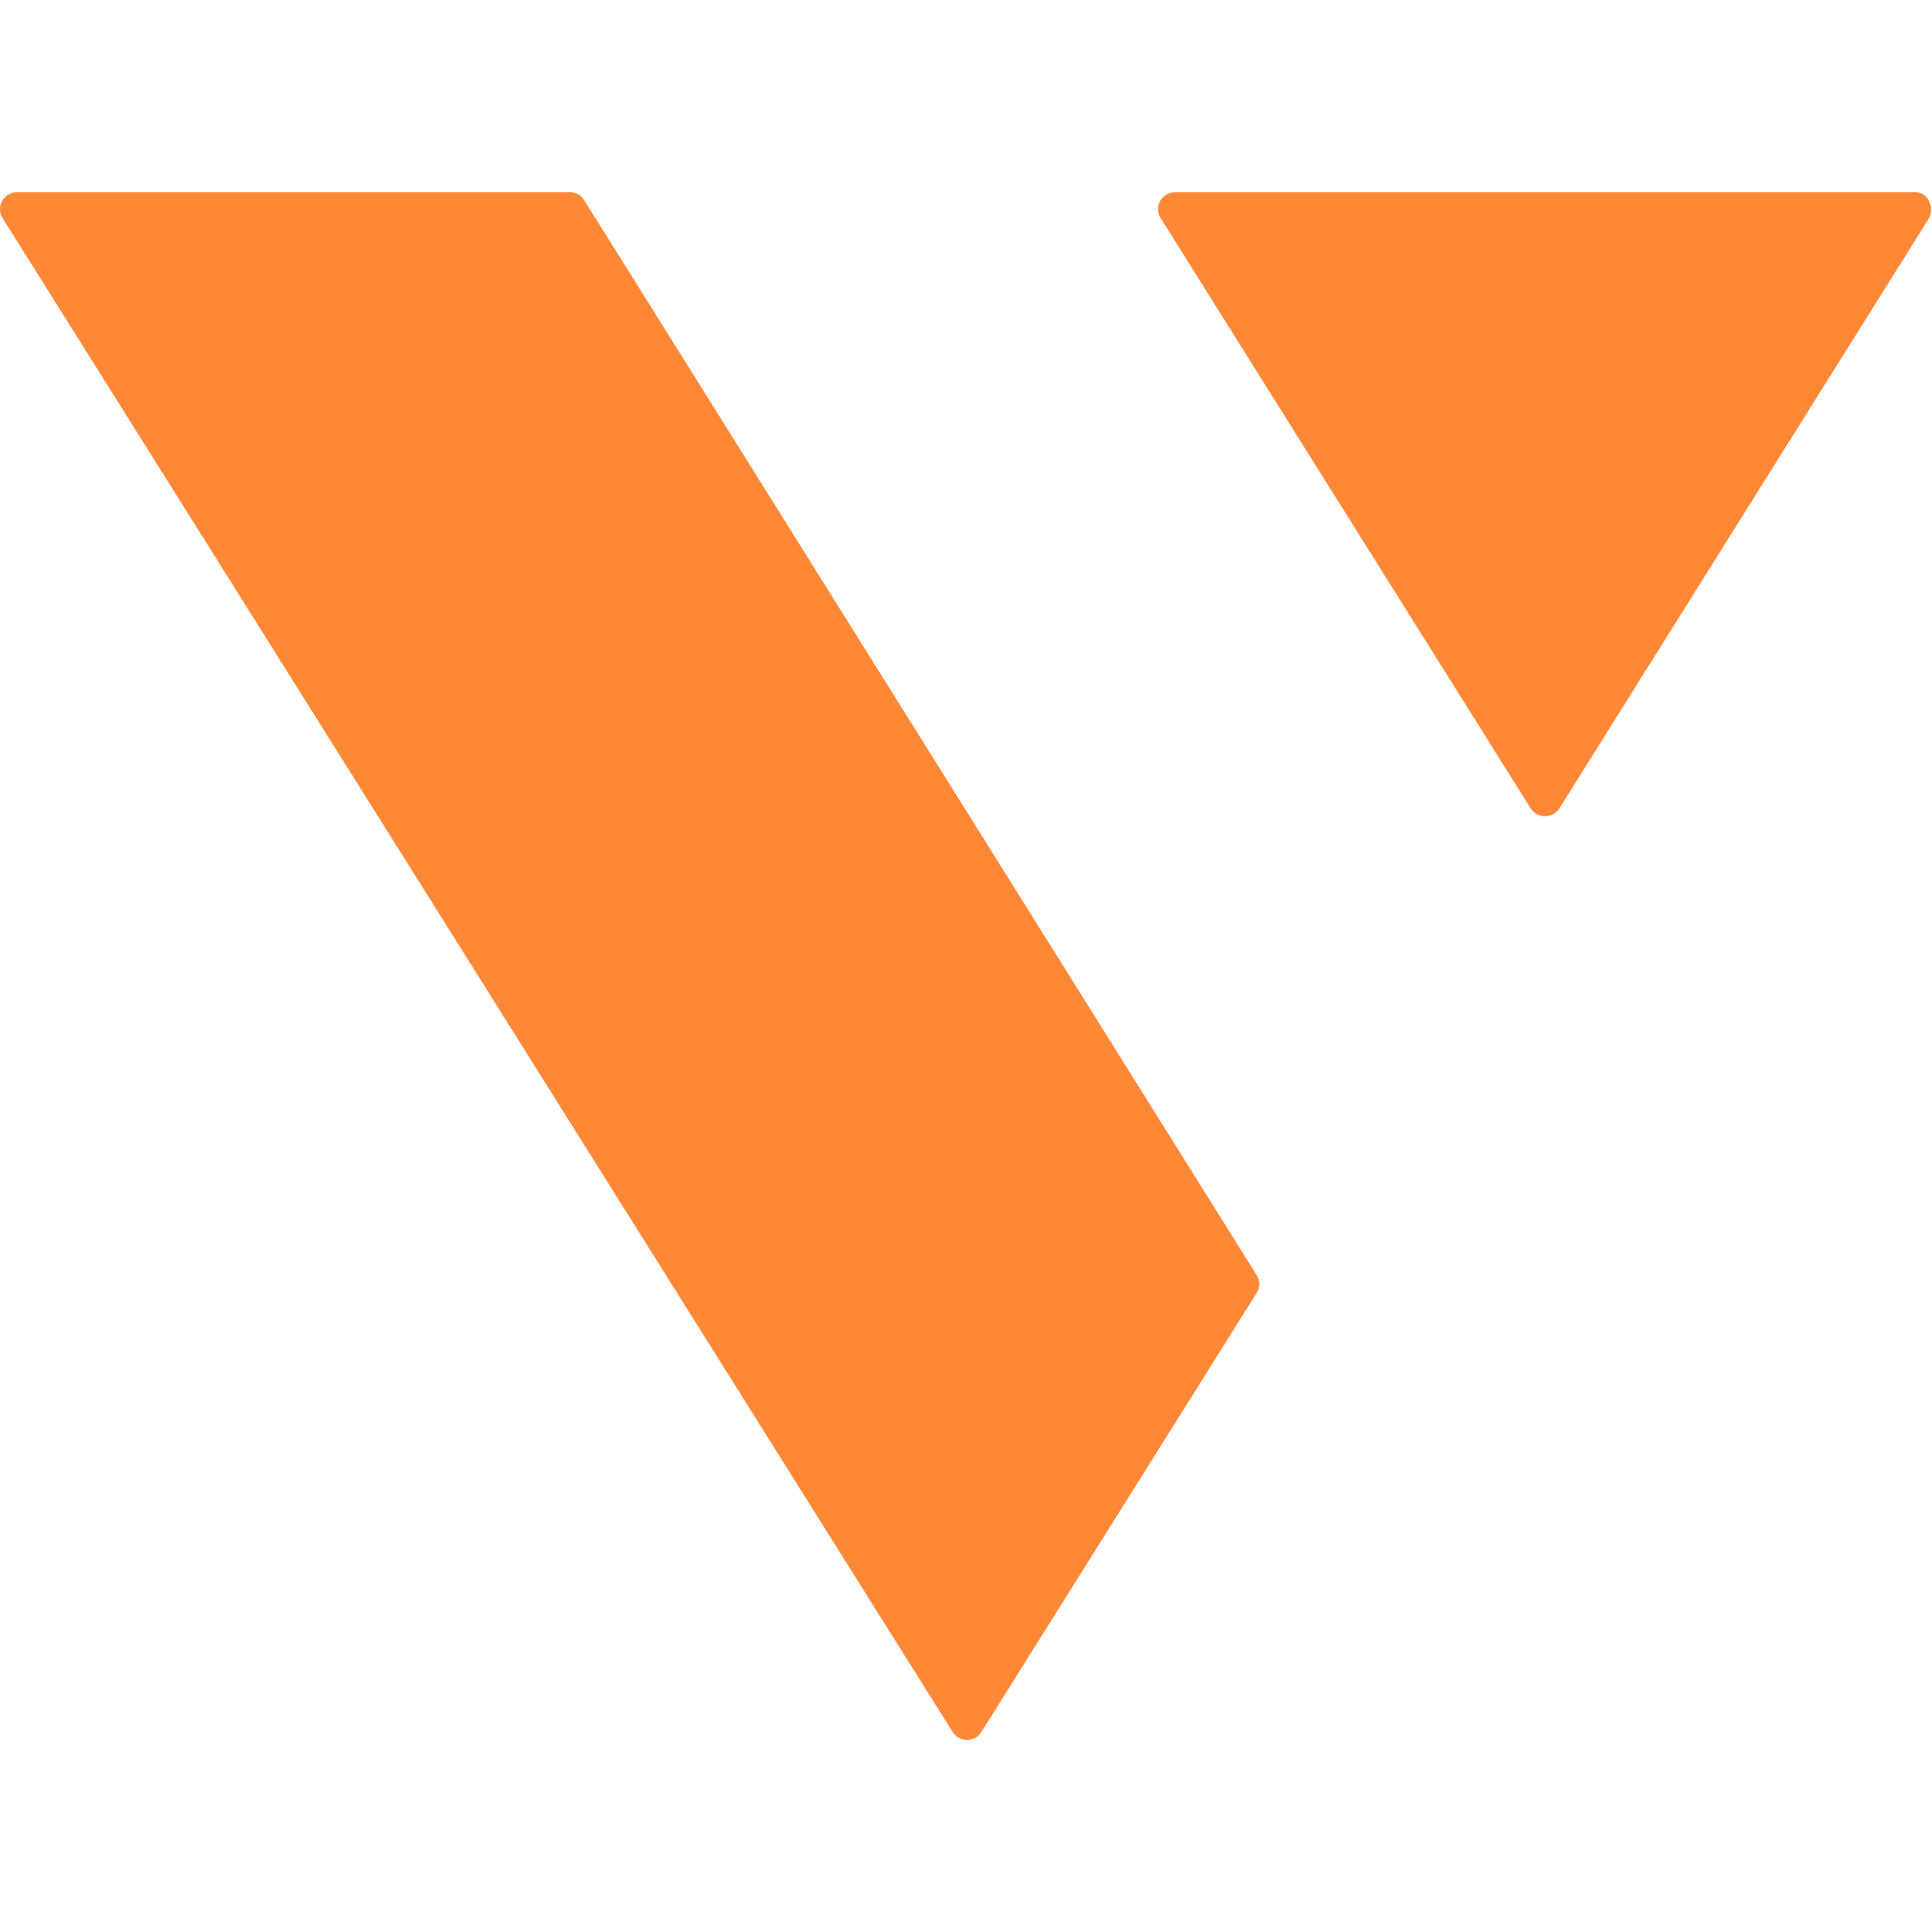 v.systems logo in png format